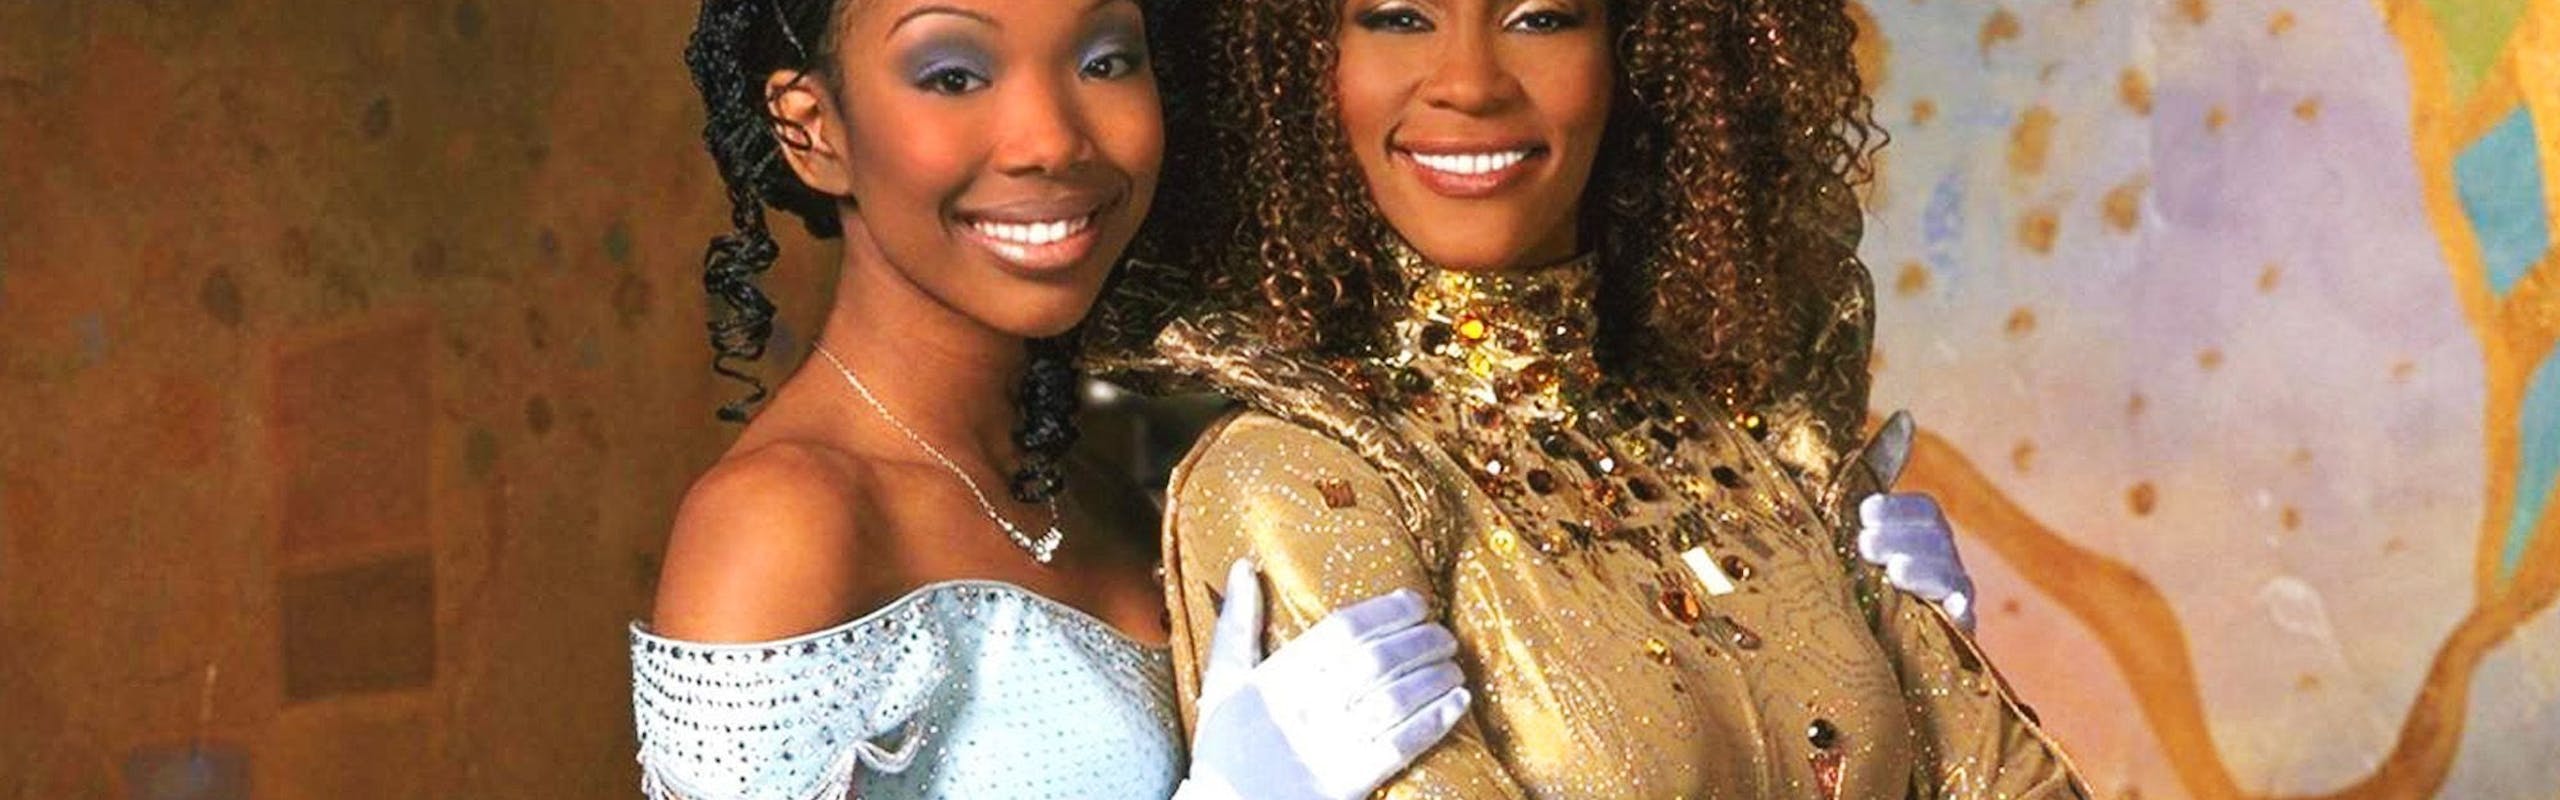 Brandy as Cinderella and Whitney Houston as Fairy Godmother